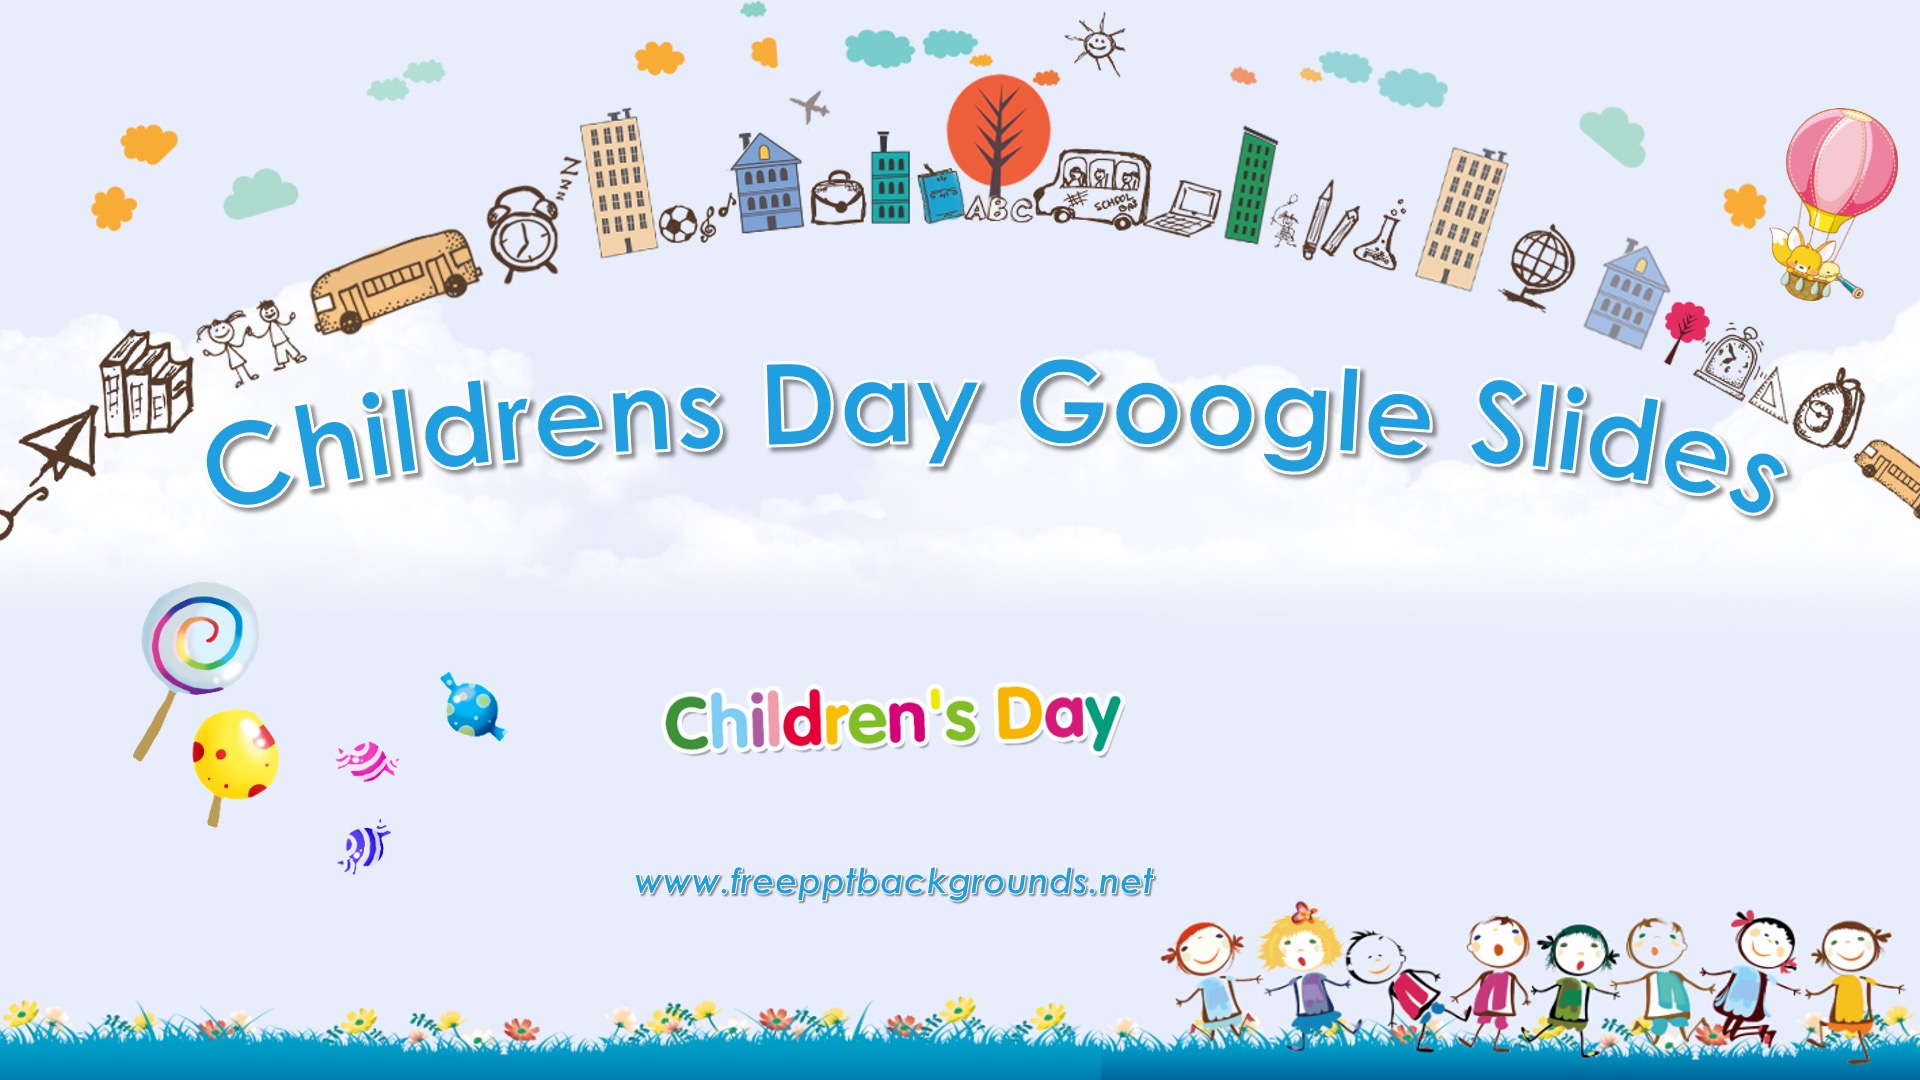 Childrens Day Powerpoint Templates Arts Education Holidays Free